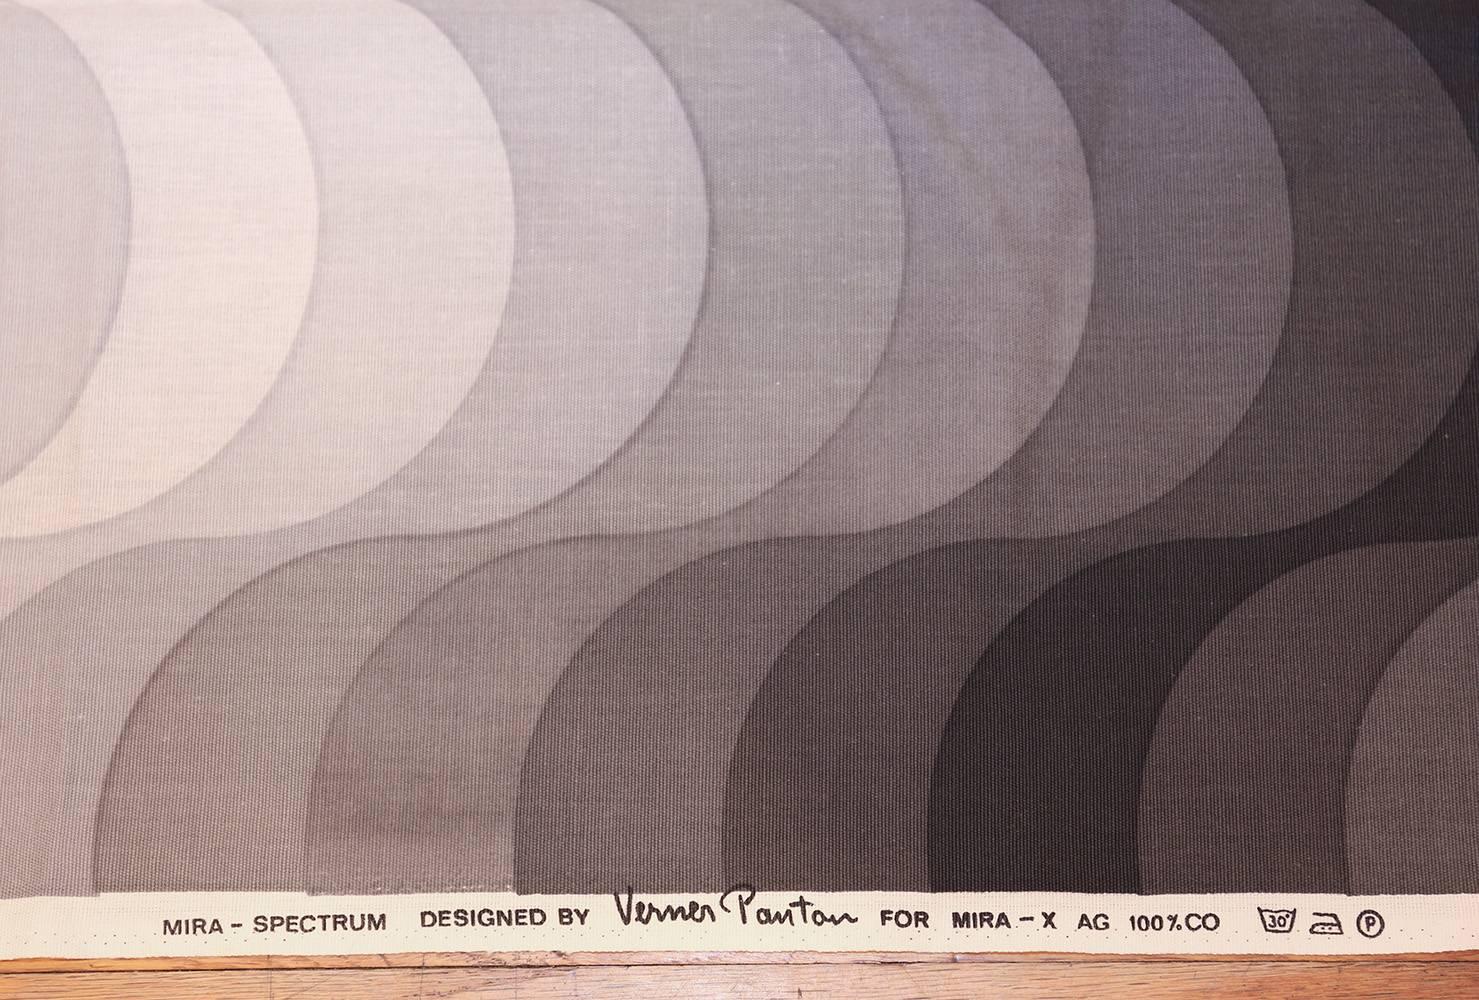 Vintage Verner Panton textile, Denmark, mid-20th century. A beautiful square size vintage textile by the iconic designer Verner Panton features an archetypal undulating wave pattern, called Welle (Wave), created in an ombre like set of white and